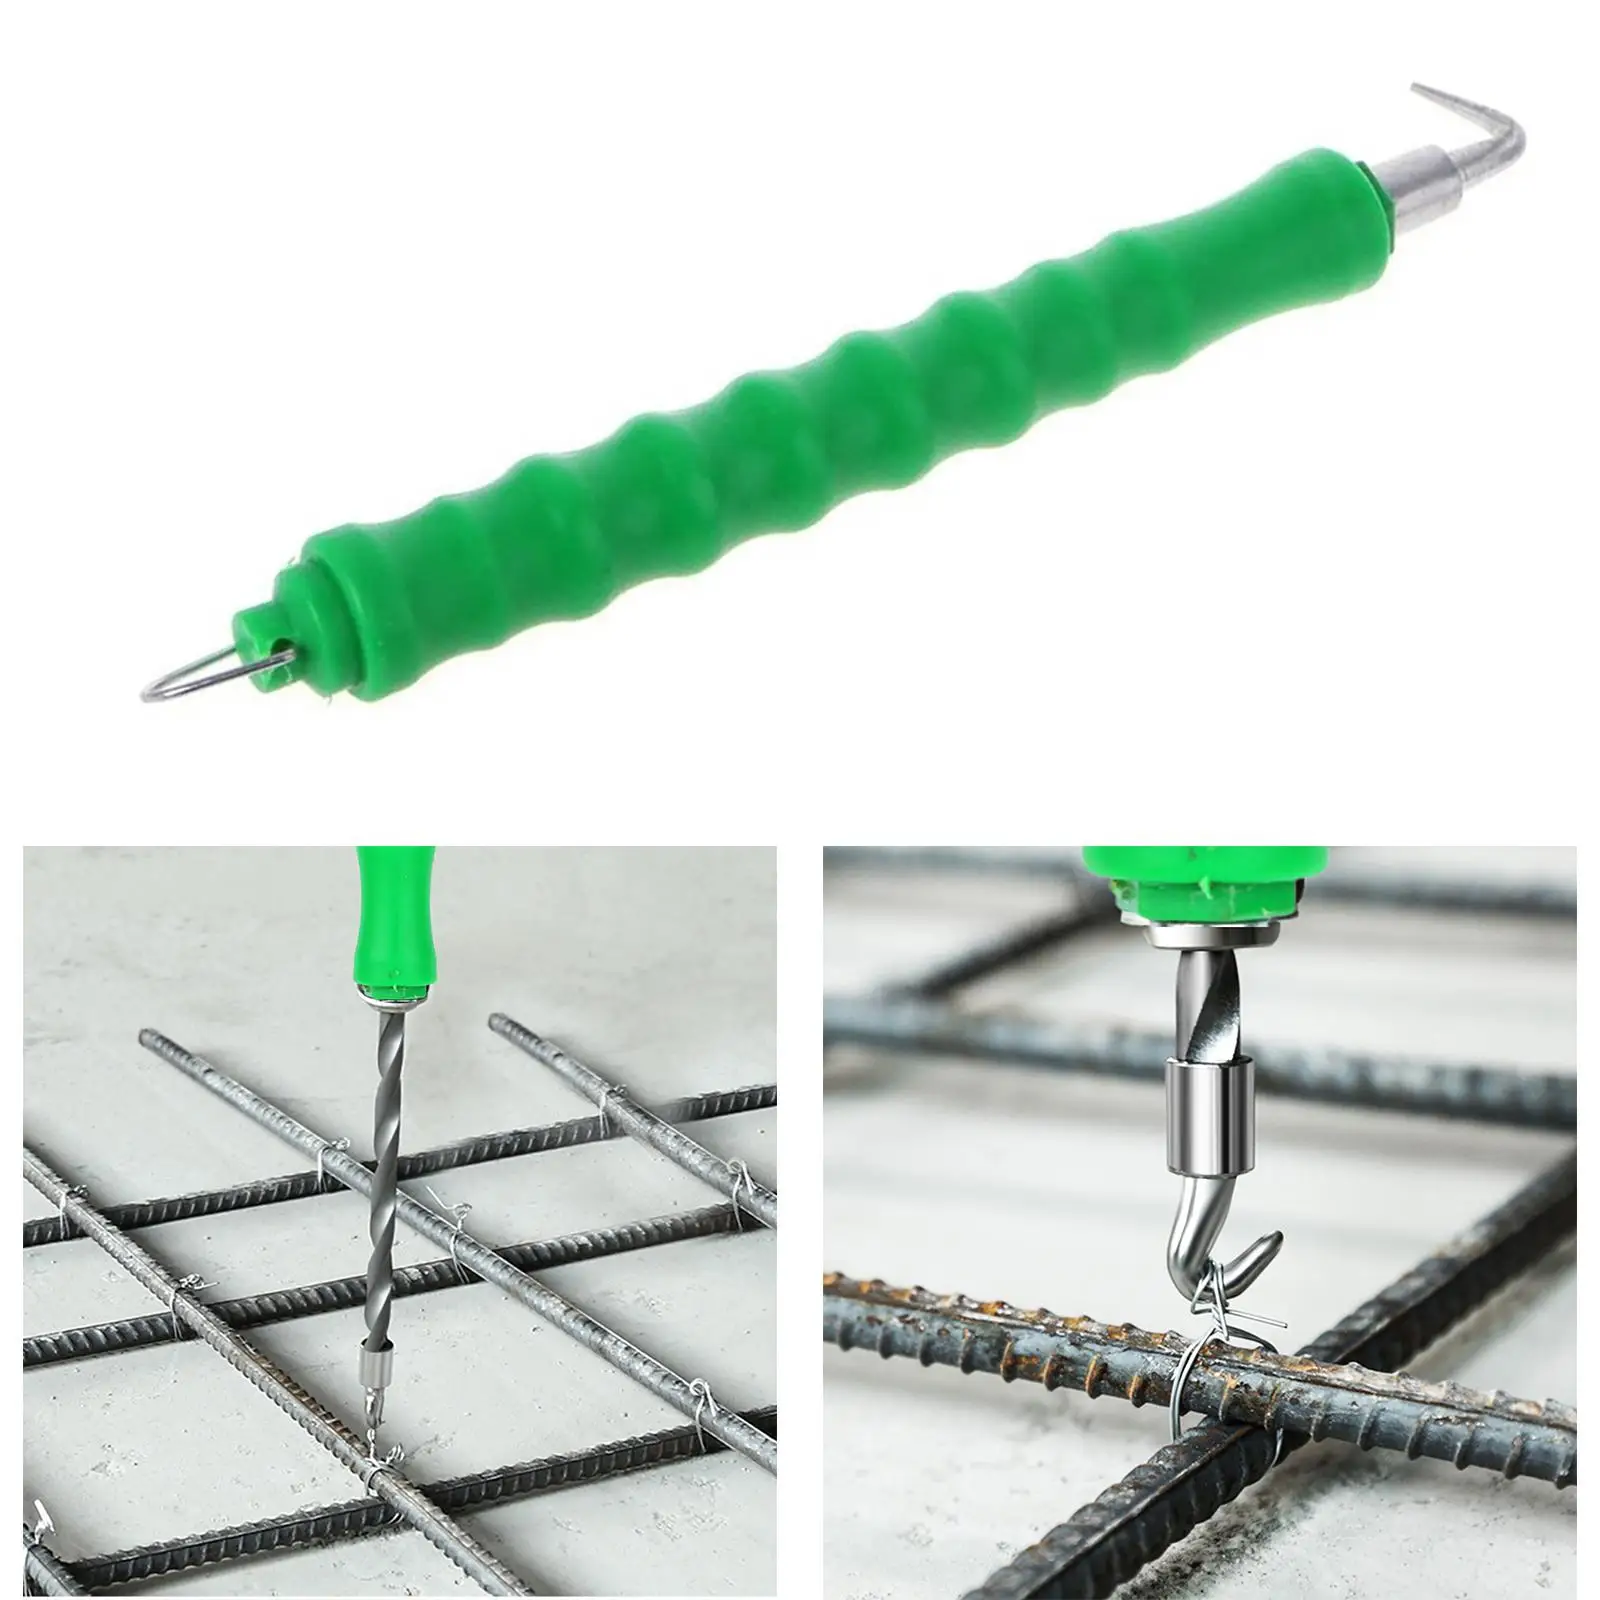 Tie Wire Sturdy with Non Slip Handle Pull Binding Hook Semi Automatic Rebar Hook for Construction Site